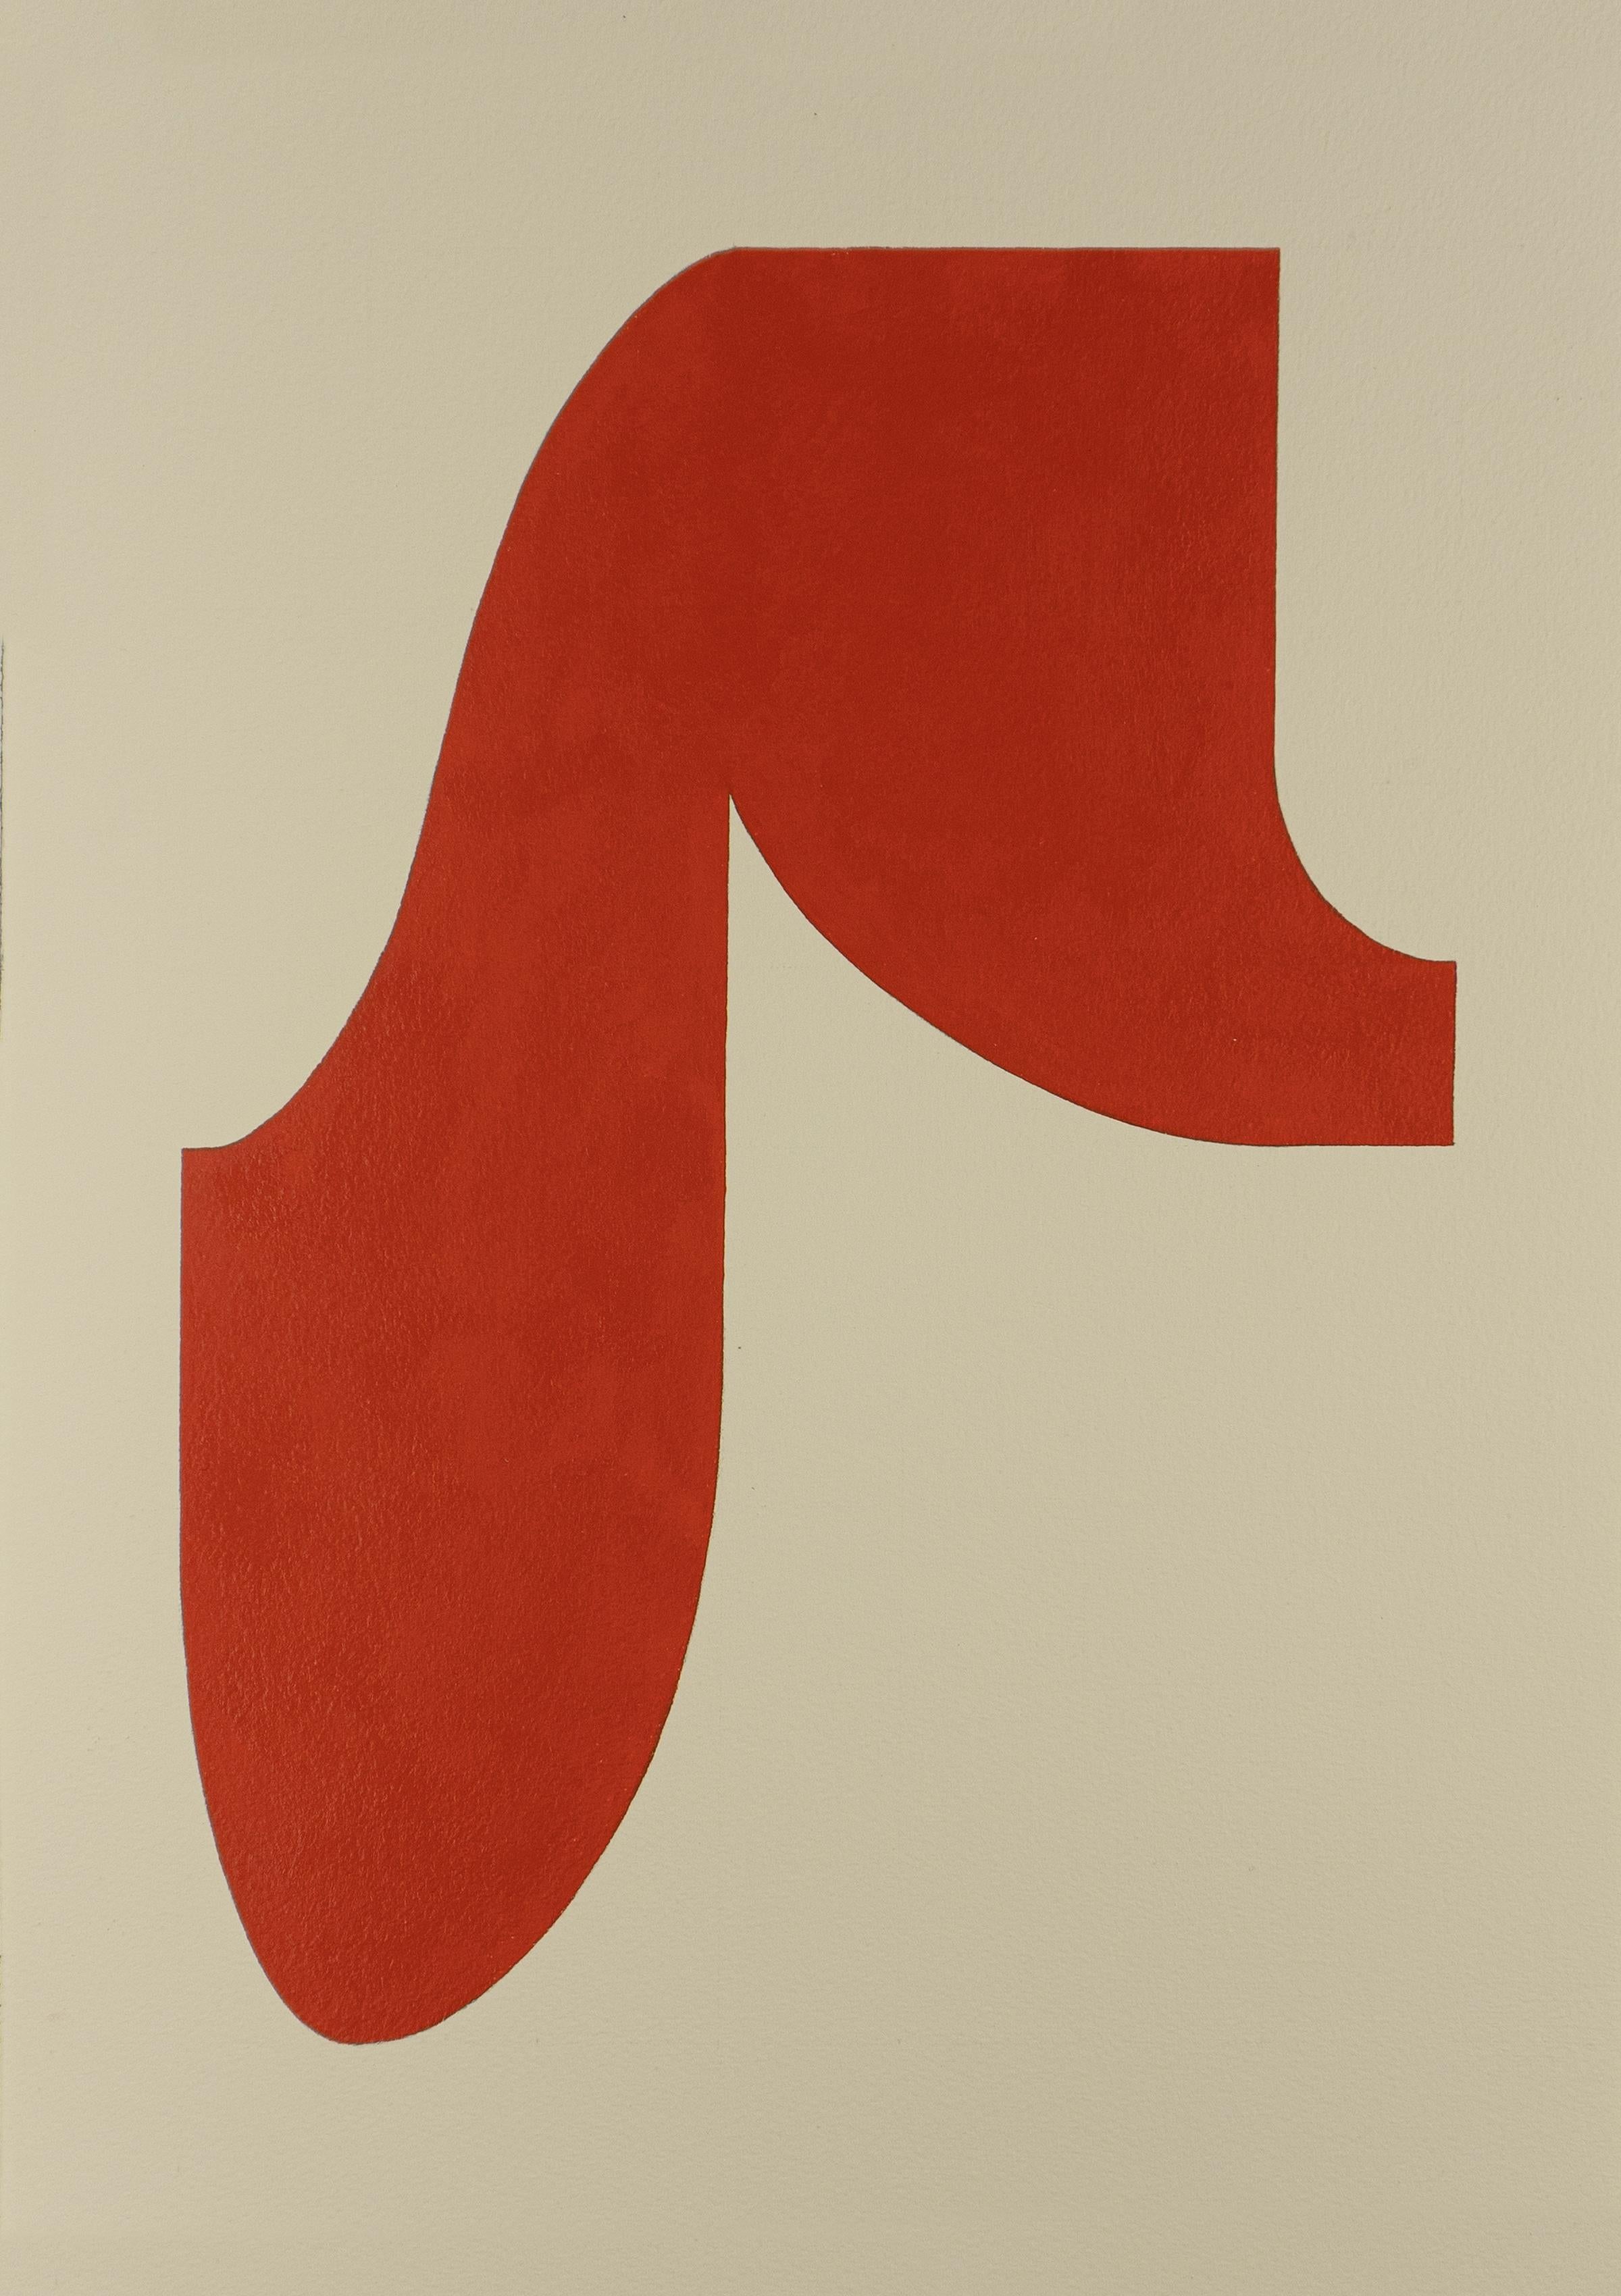 Ryan Park Abstract Painting - Shape 22 (2019) - Abstract shape, minimalist gestural, deep red & white on paper